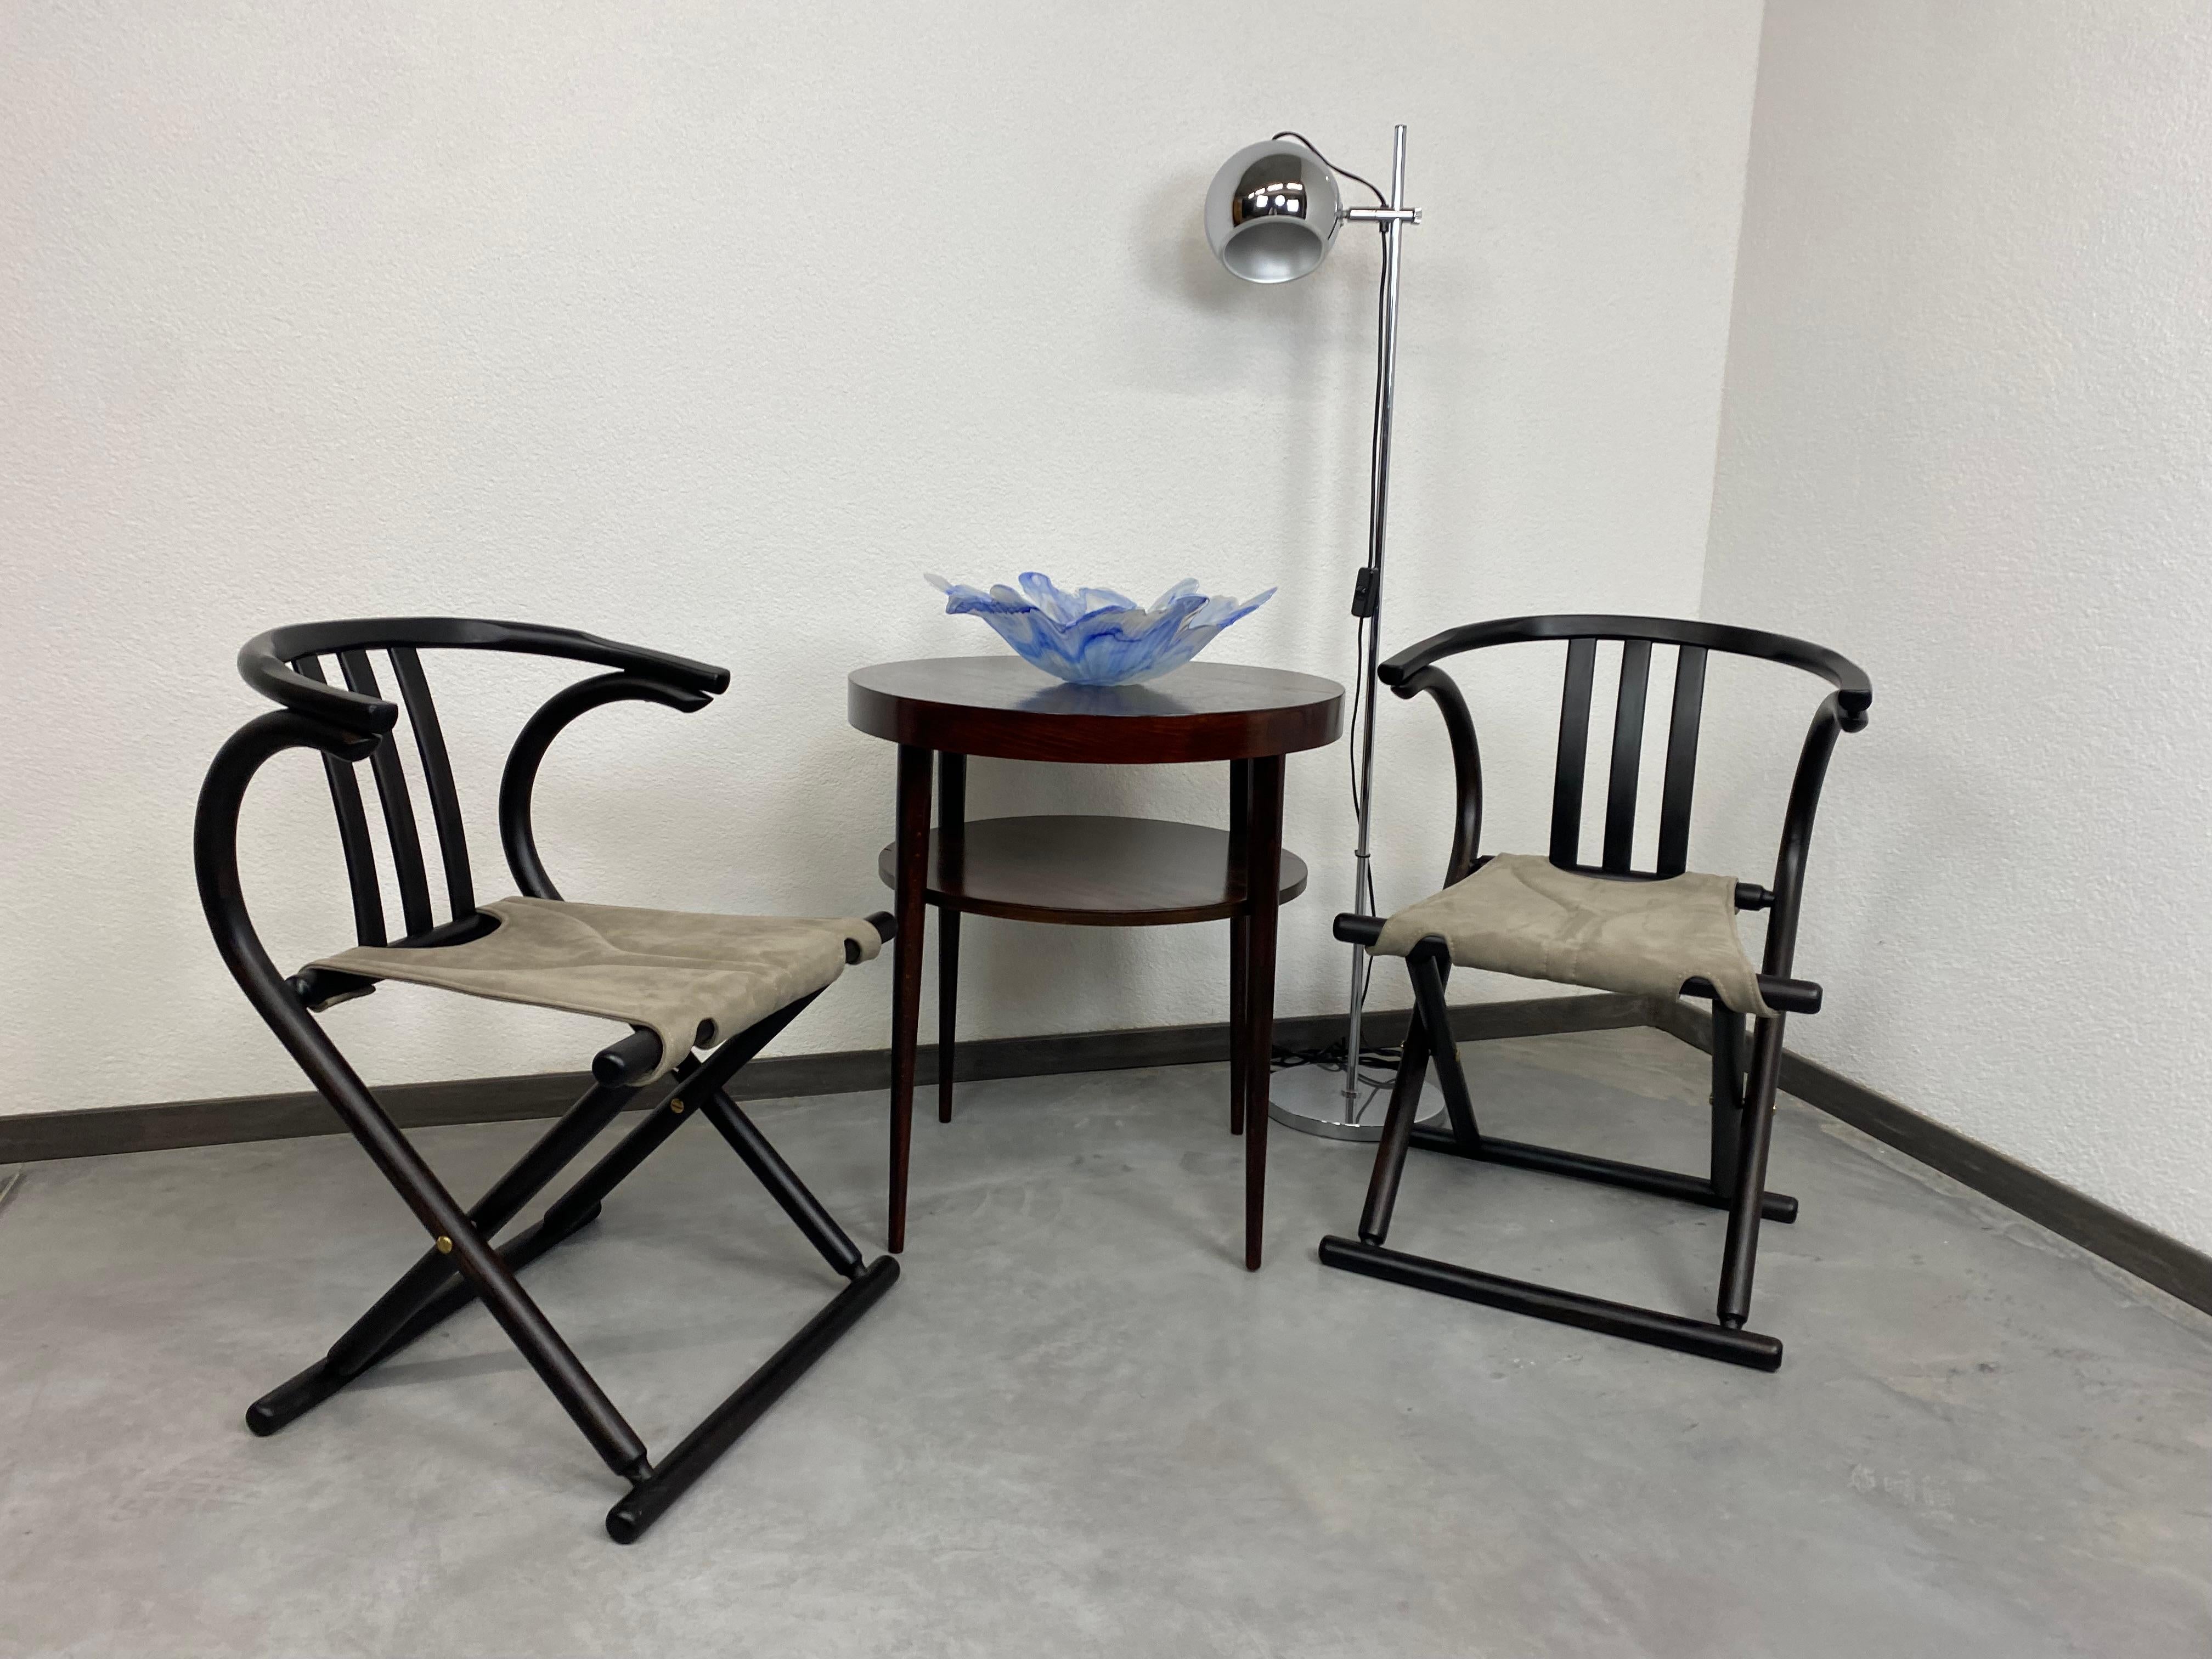 Czech Pair of Vintage Thonet Folding Chairs